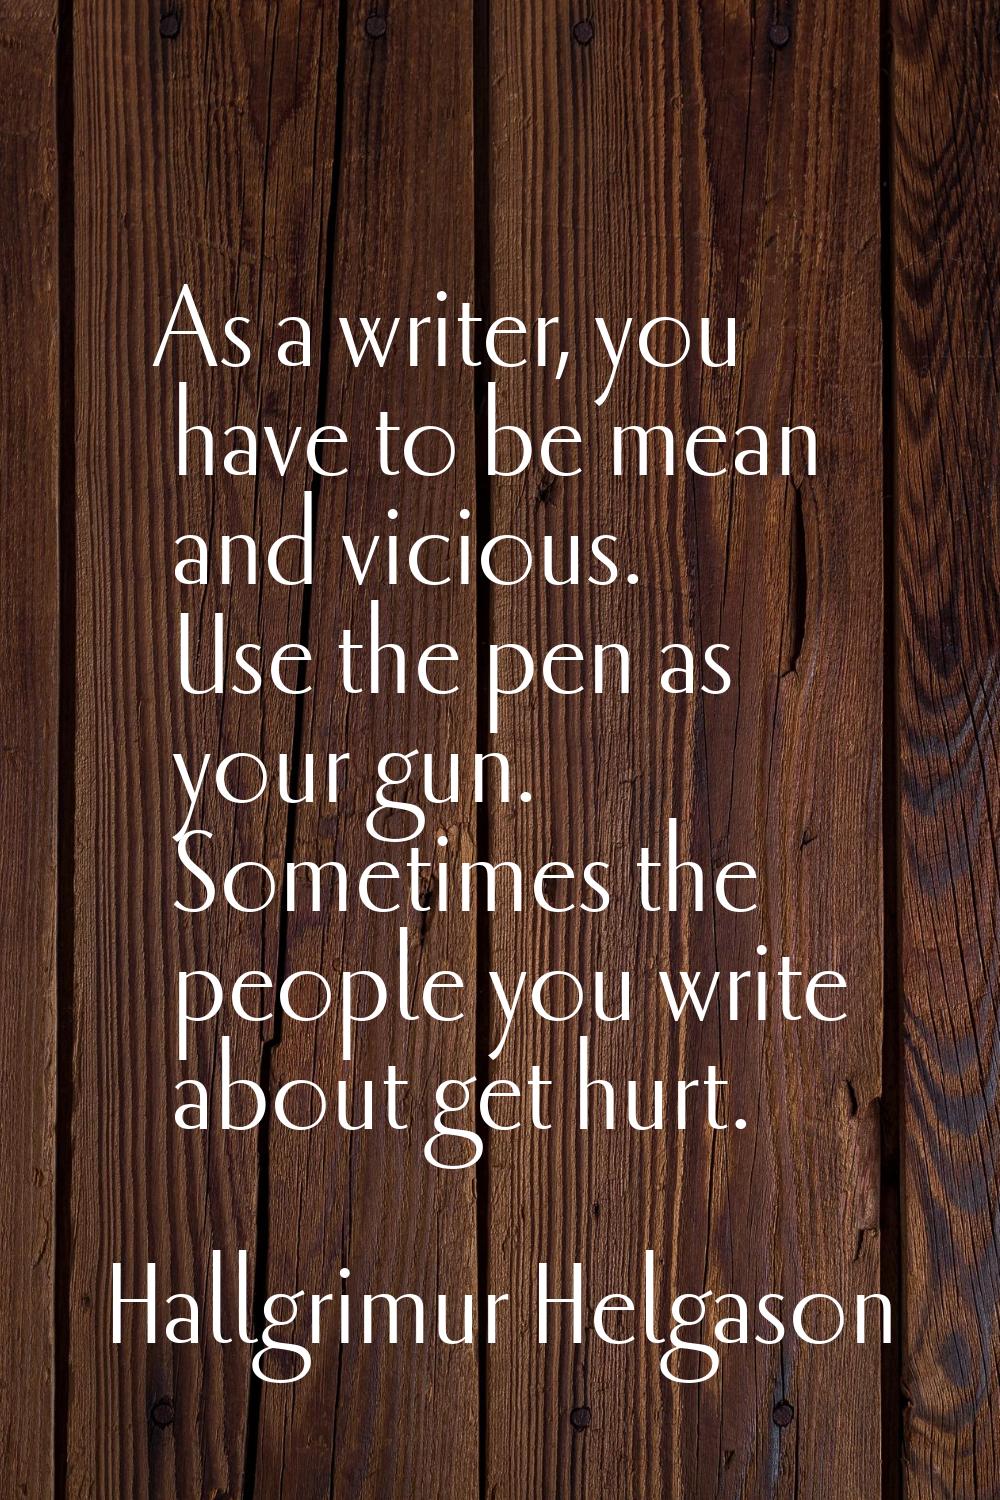 As a writer, you have to be mean and vicious. Use the pen as your gun. Sometimes the people you wri